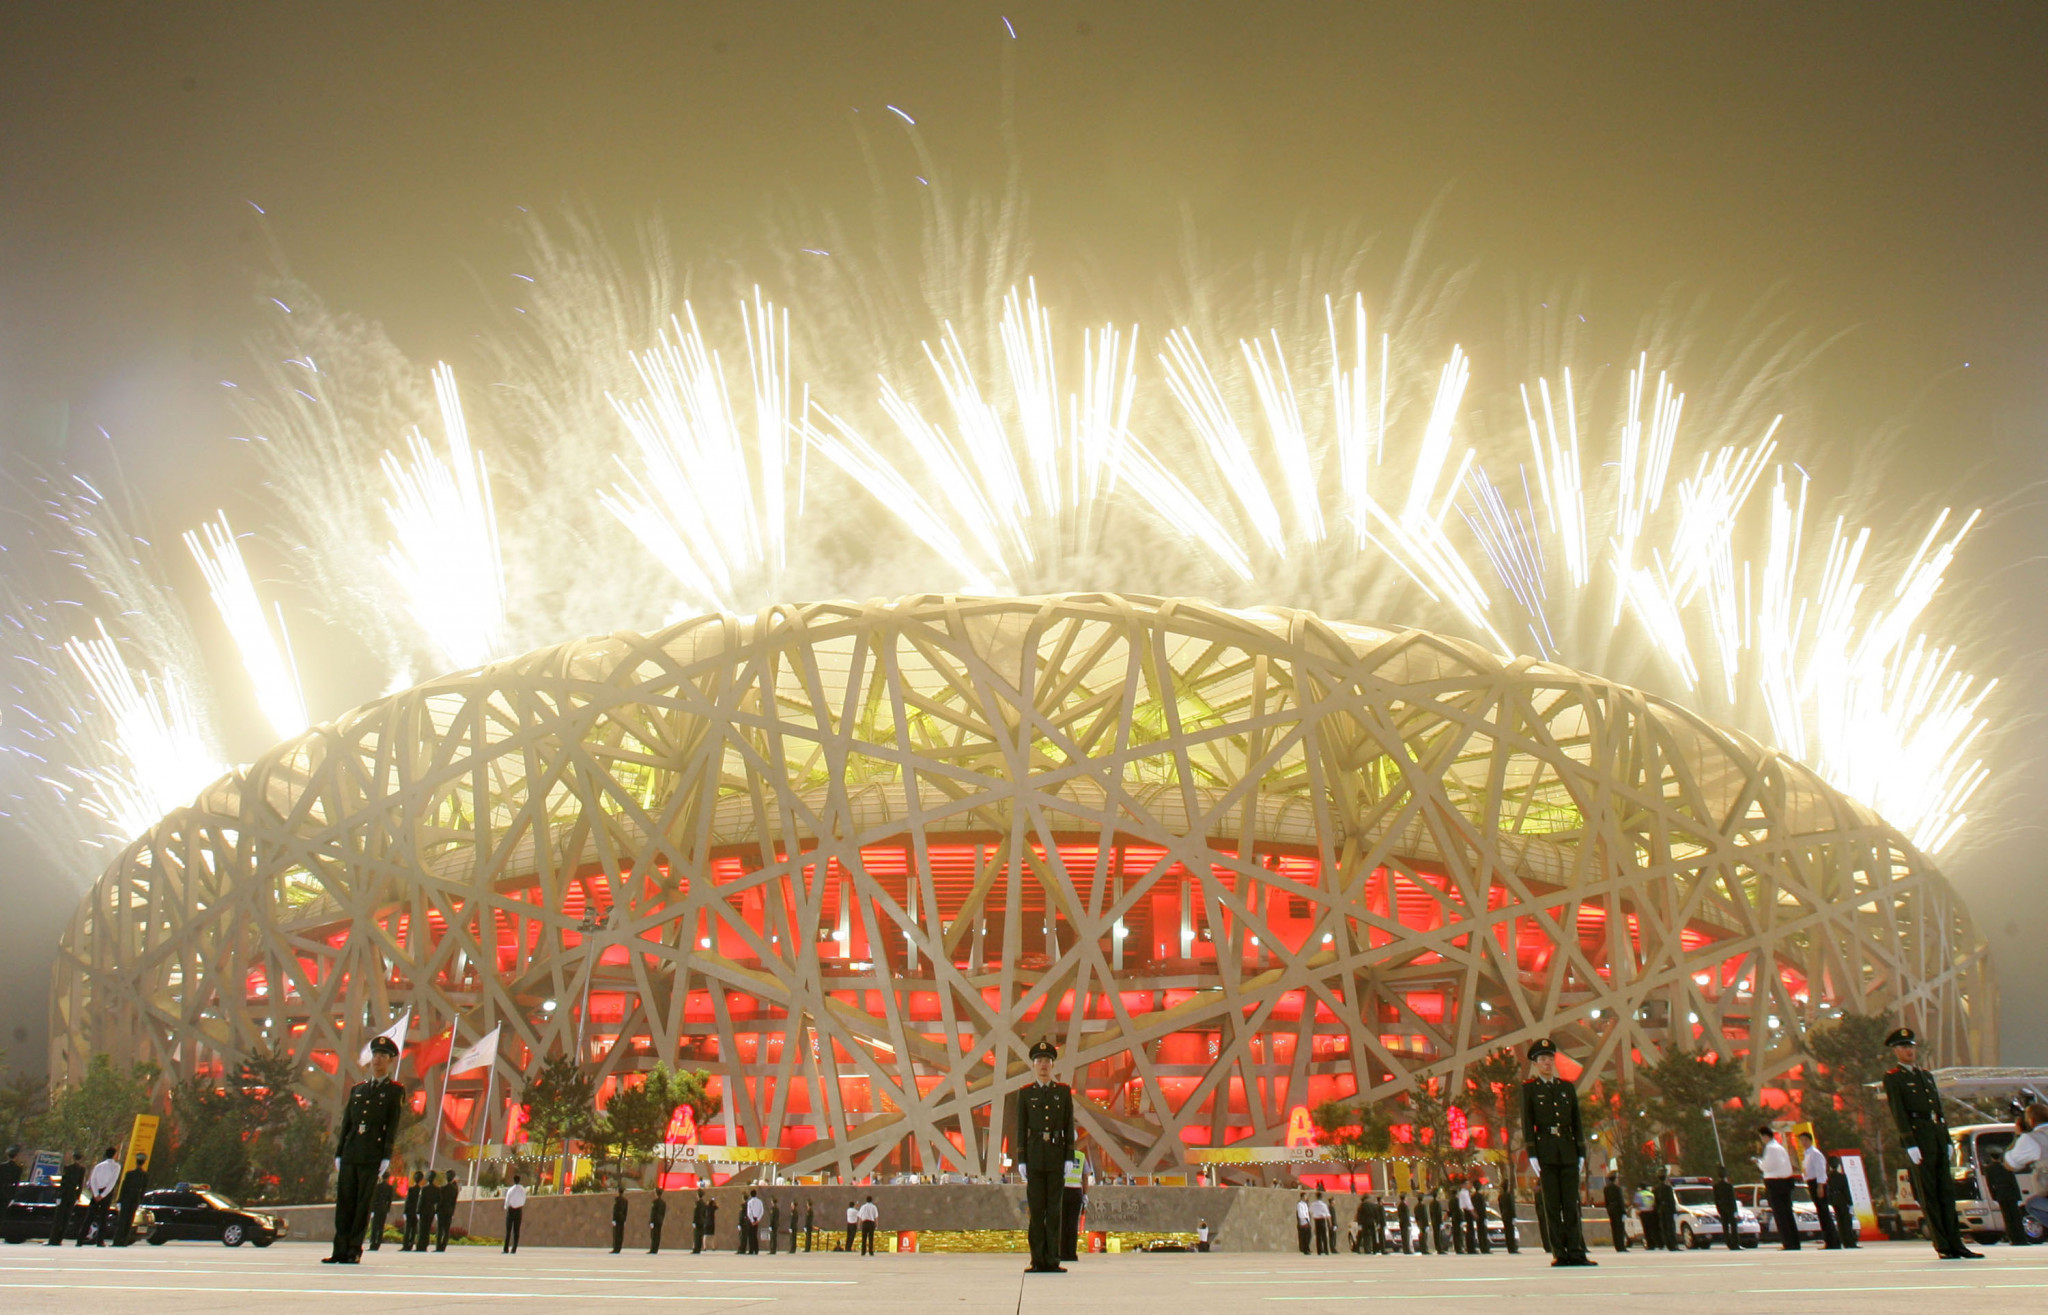 Turkish Foreign Minister Mevlüt Çavuşoğlu cited the 2008 Summer Olympics in expressing his confidence about Beijing 2022 ©Getty Images